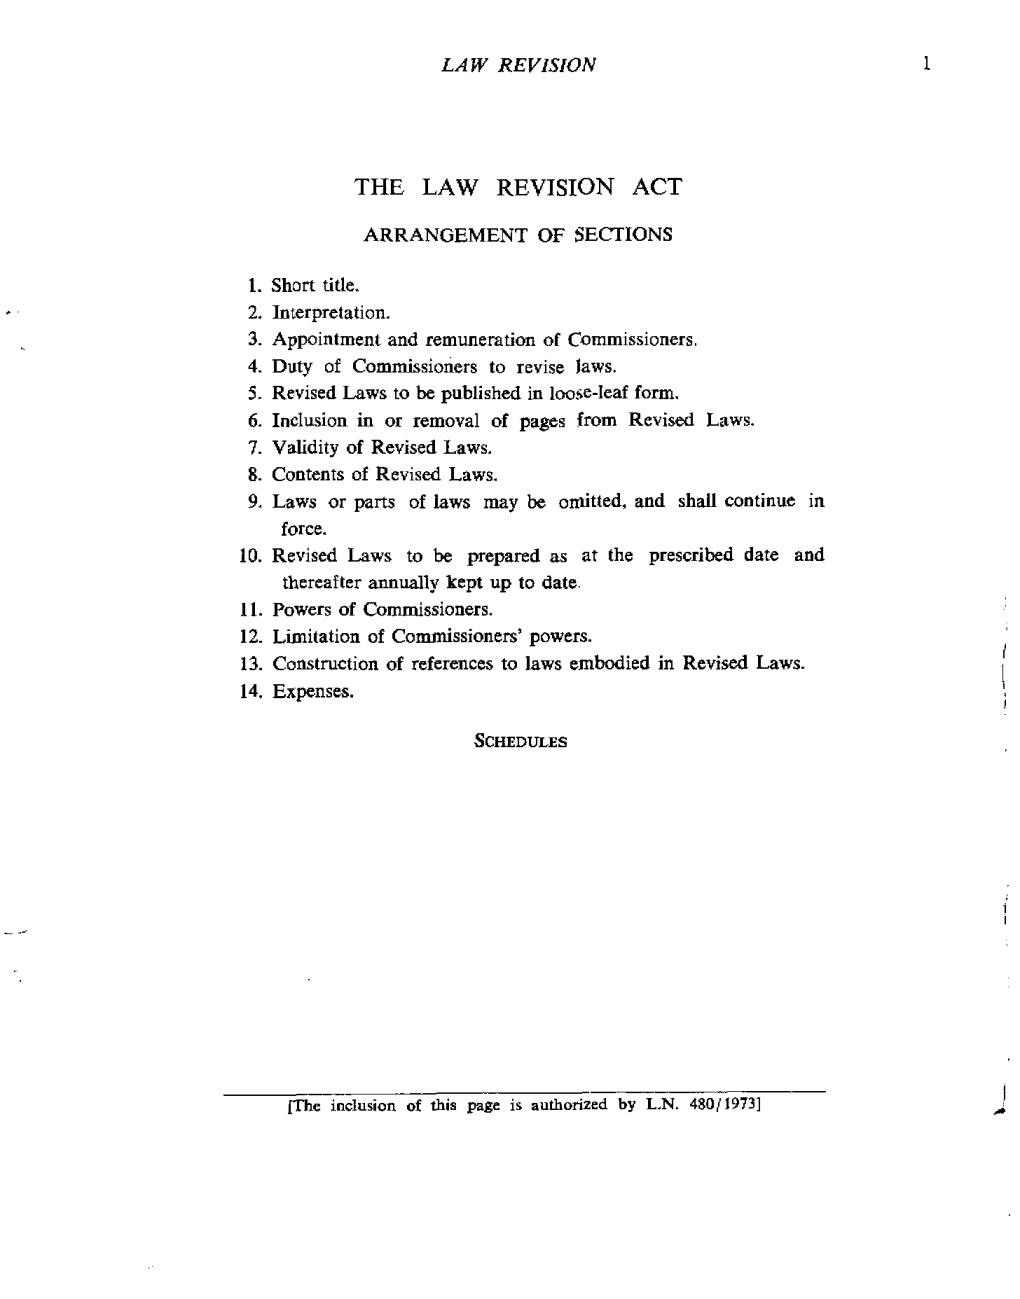 The Law Revision Act